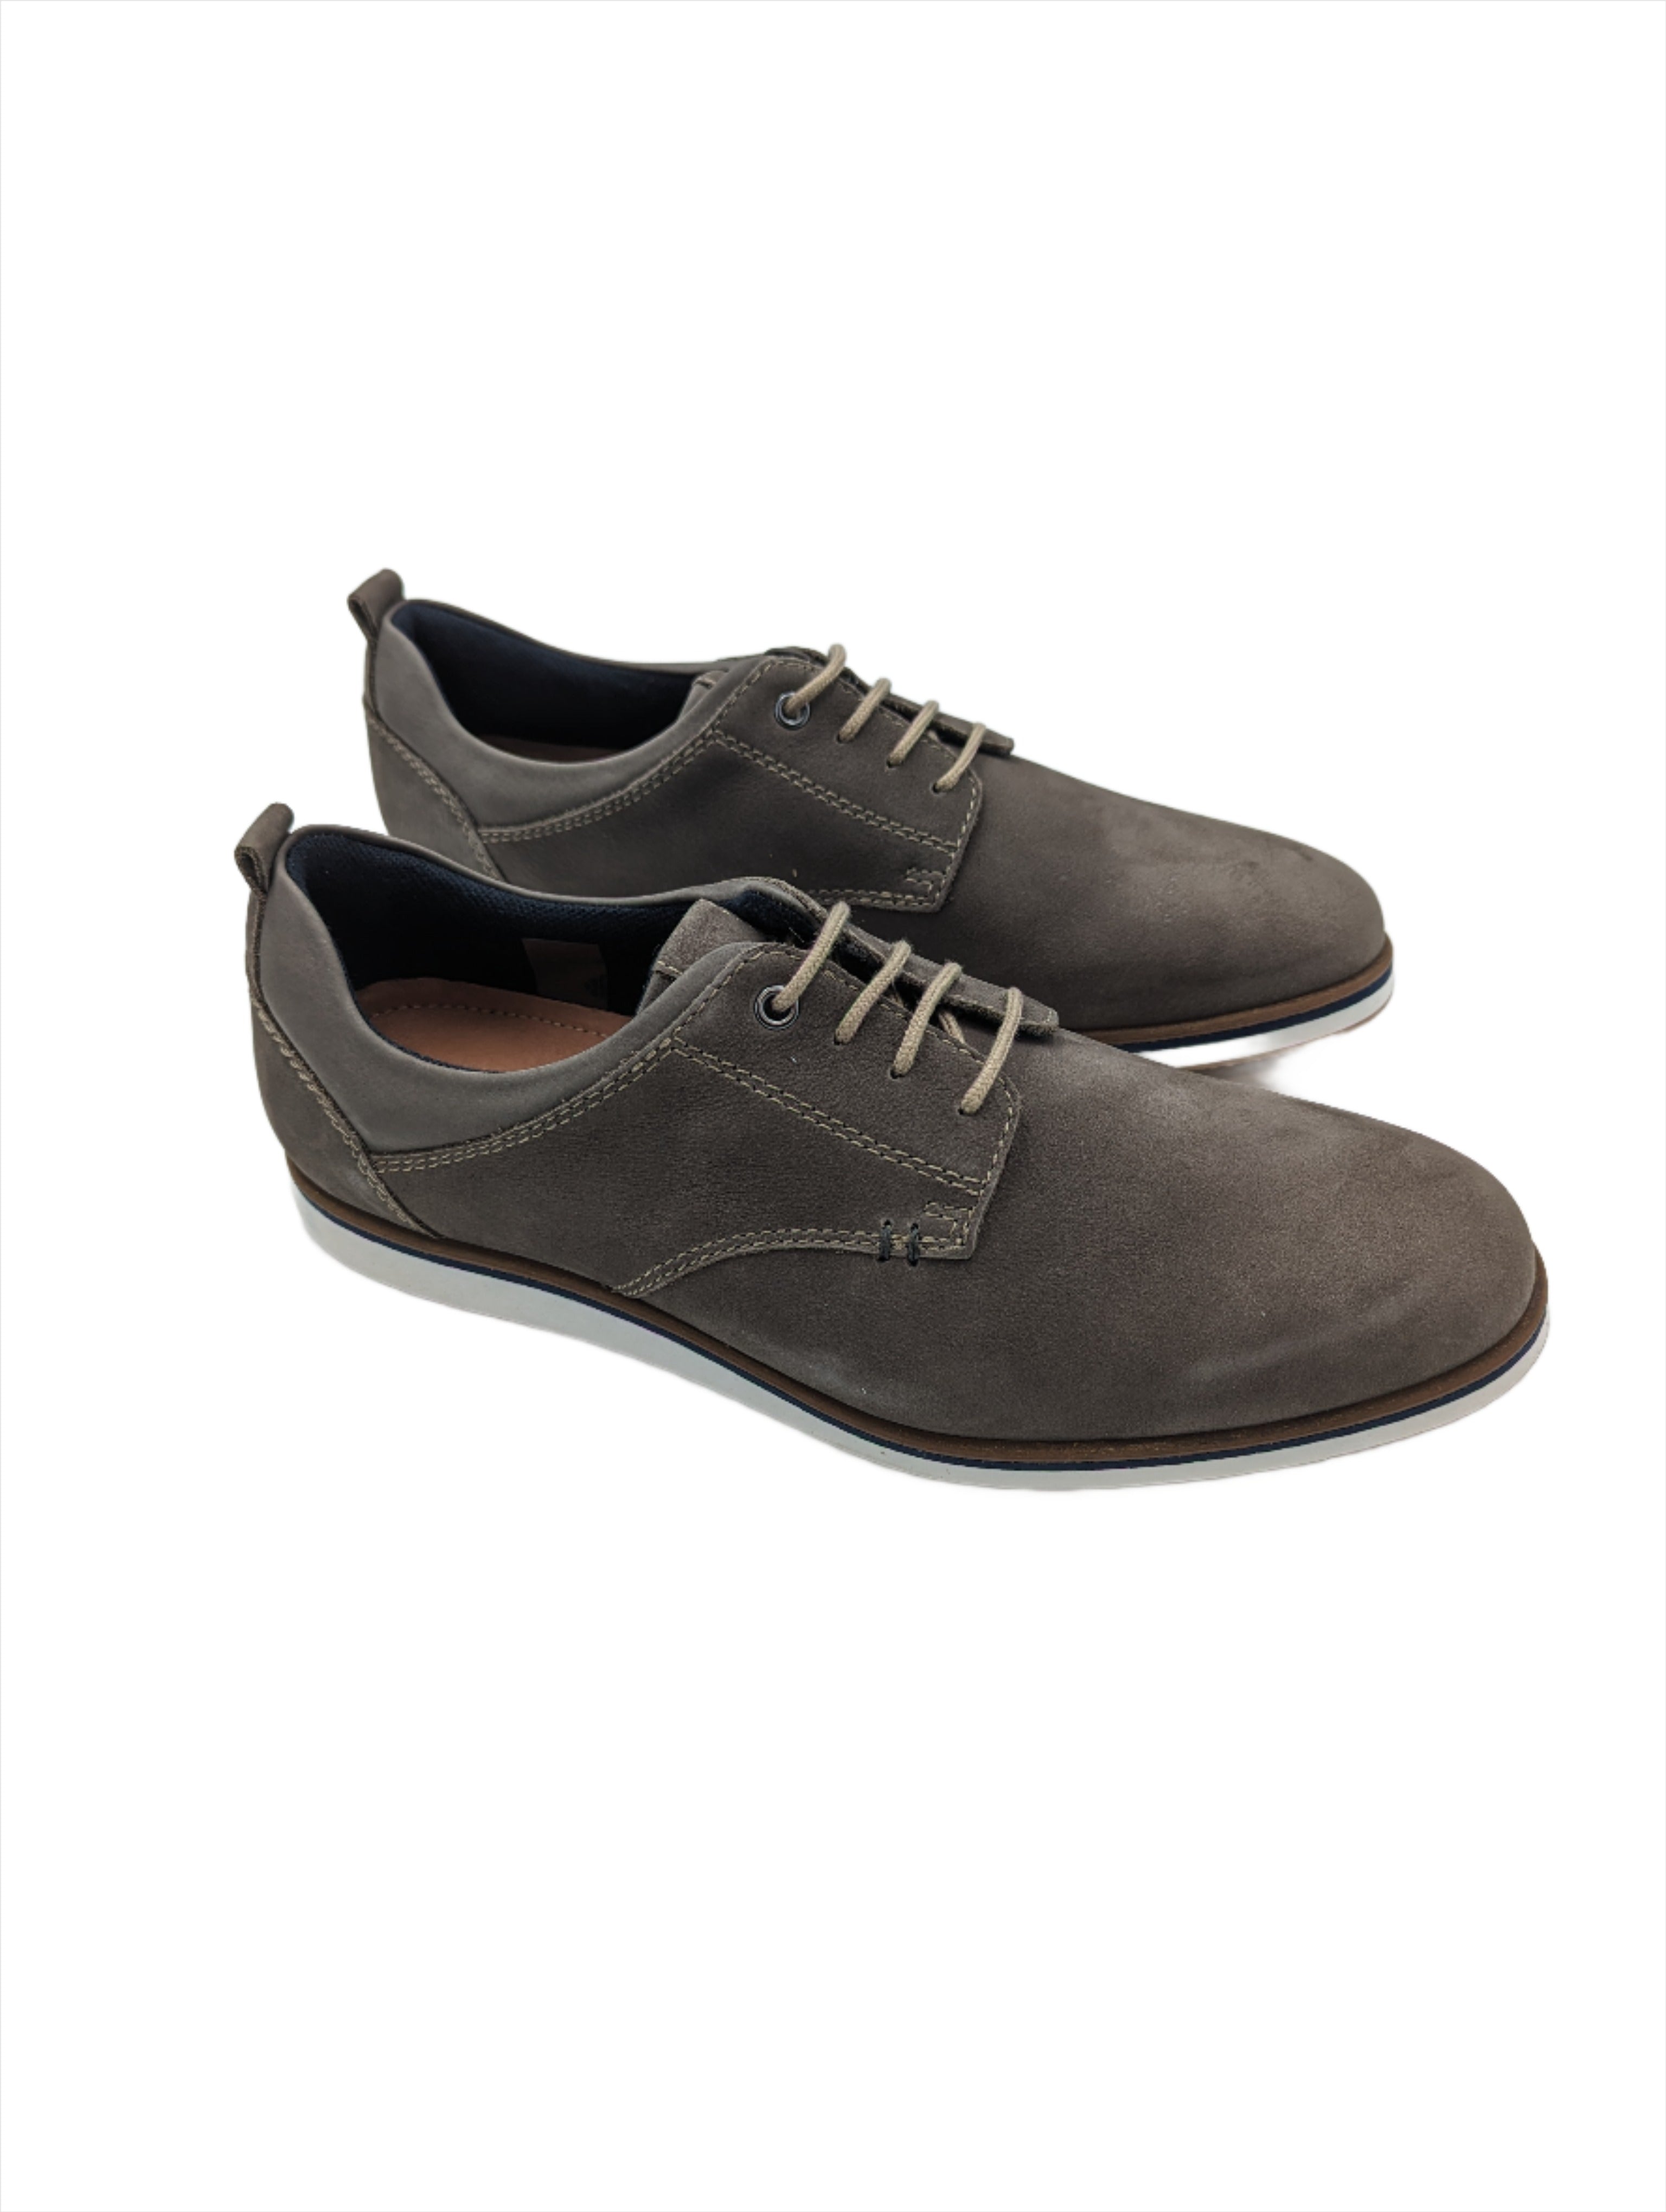 Stafford Pebble lace up shoe-Side view